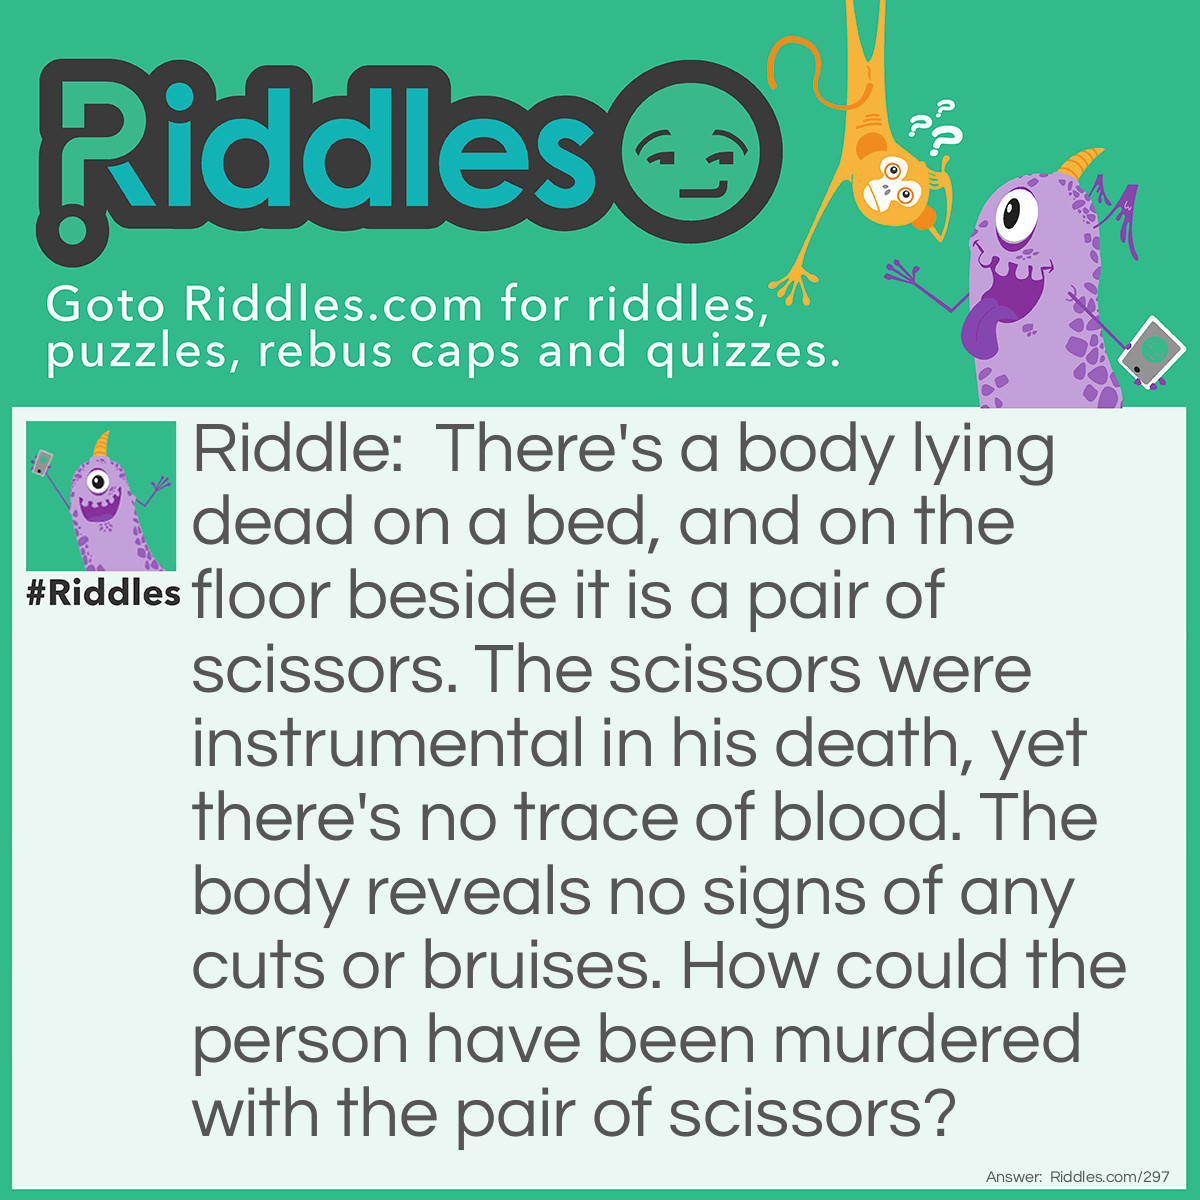 Riddle: There's a body lying dead on a bed, and on the floor beside it is a pair of scissors. The scissors were instrumental in his death, yet there's no trace of blood. The body reveals no signs of any cuts or bruises. How could the person have been murdered with the pair of scissors? Answer: The person slept on a waterbed. His killer used the scissors to cut the bed open and drown him.